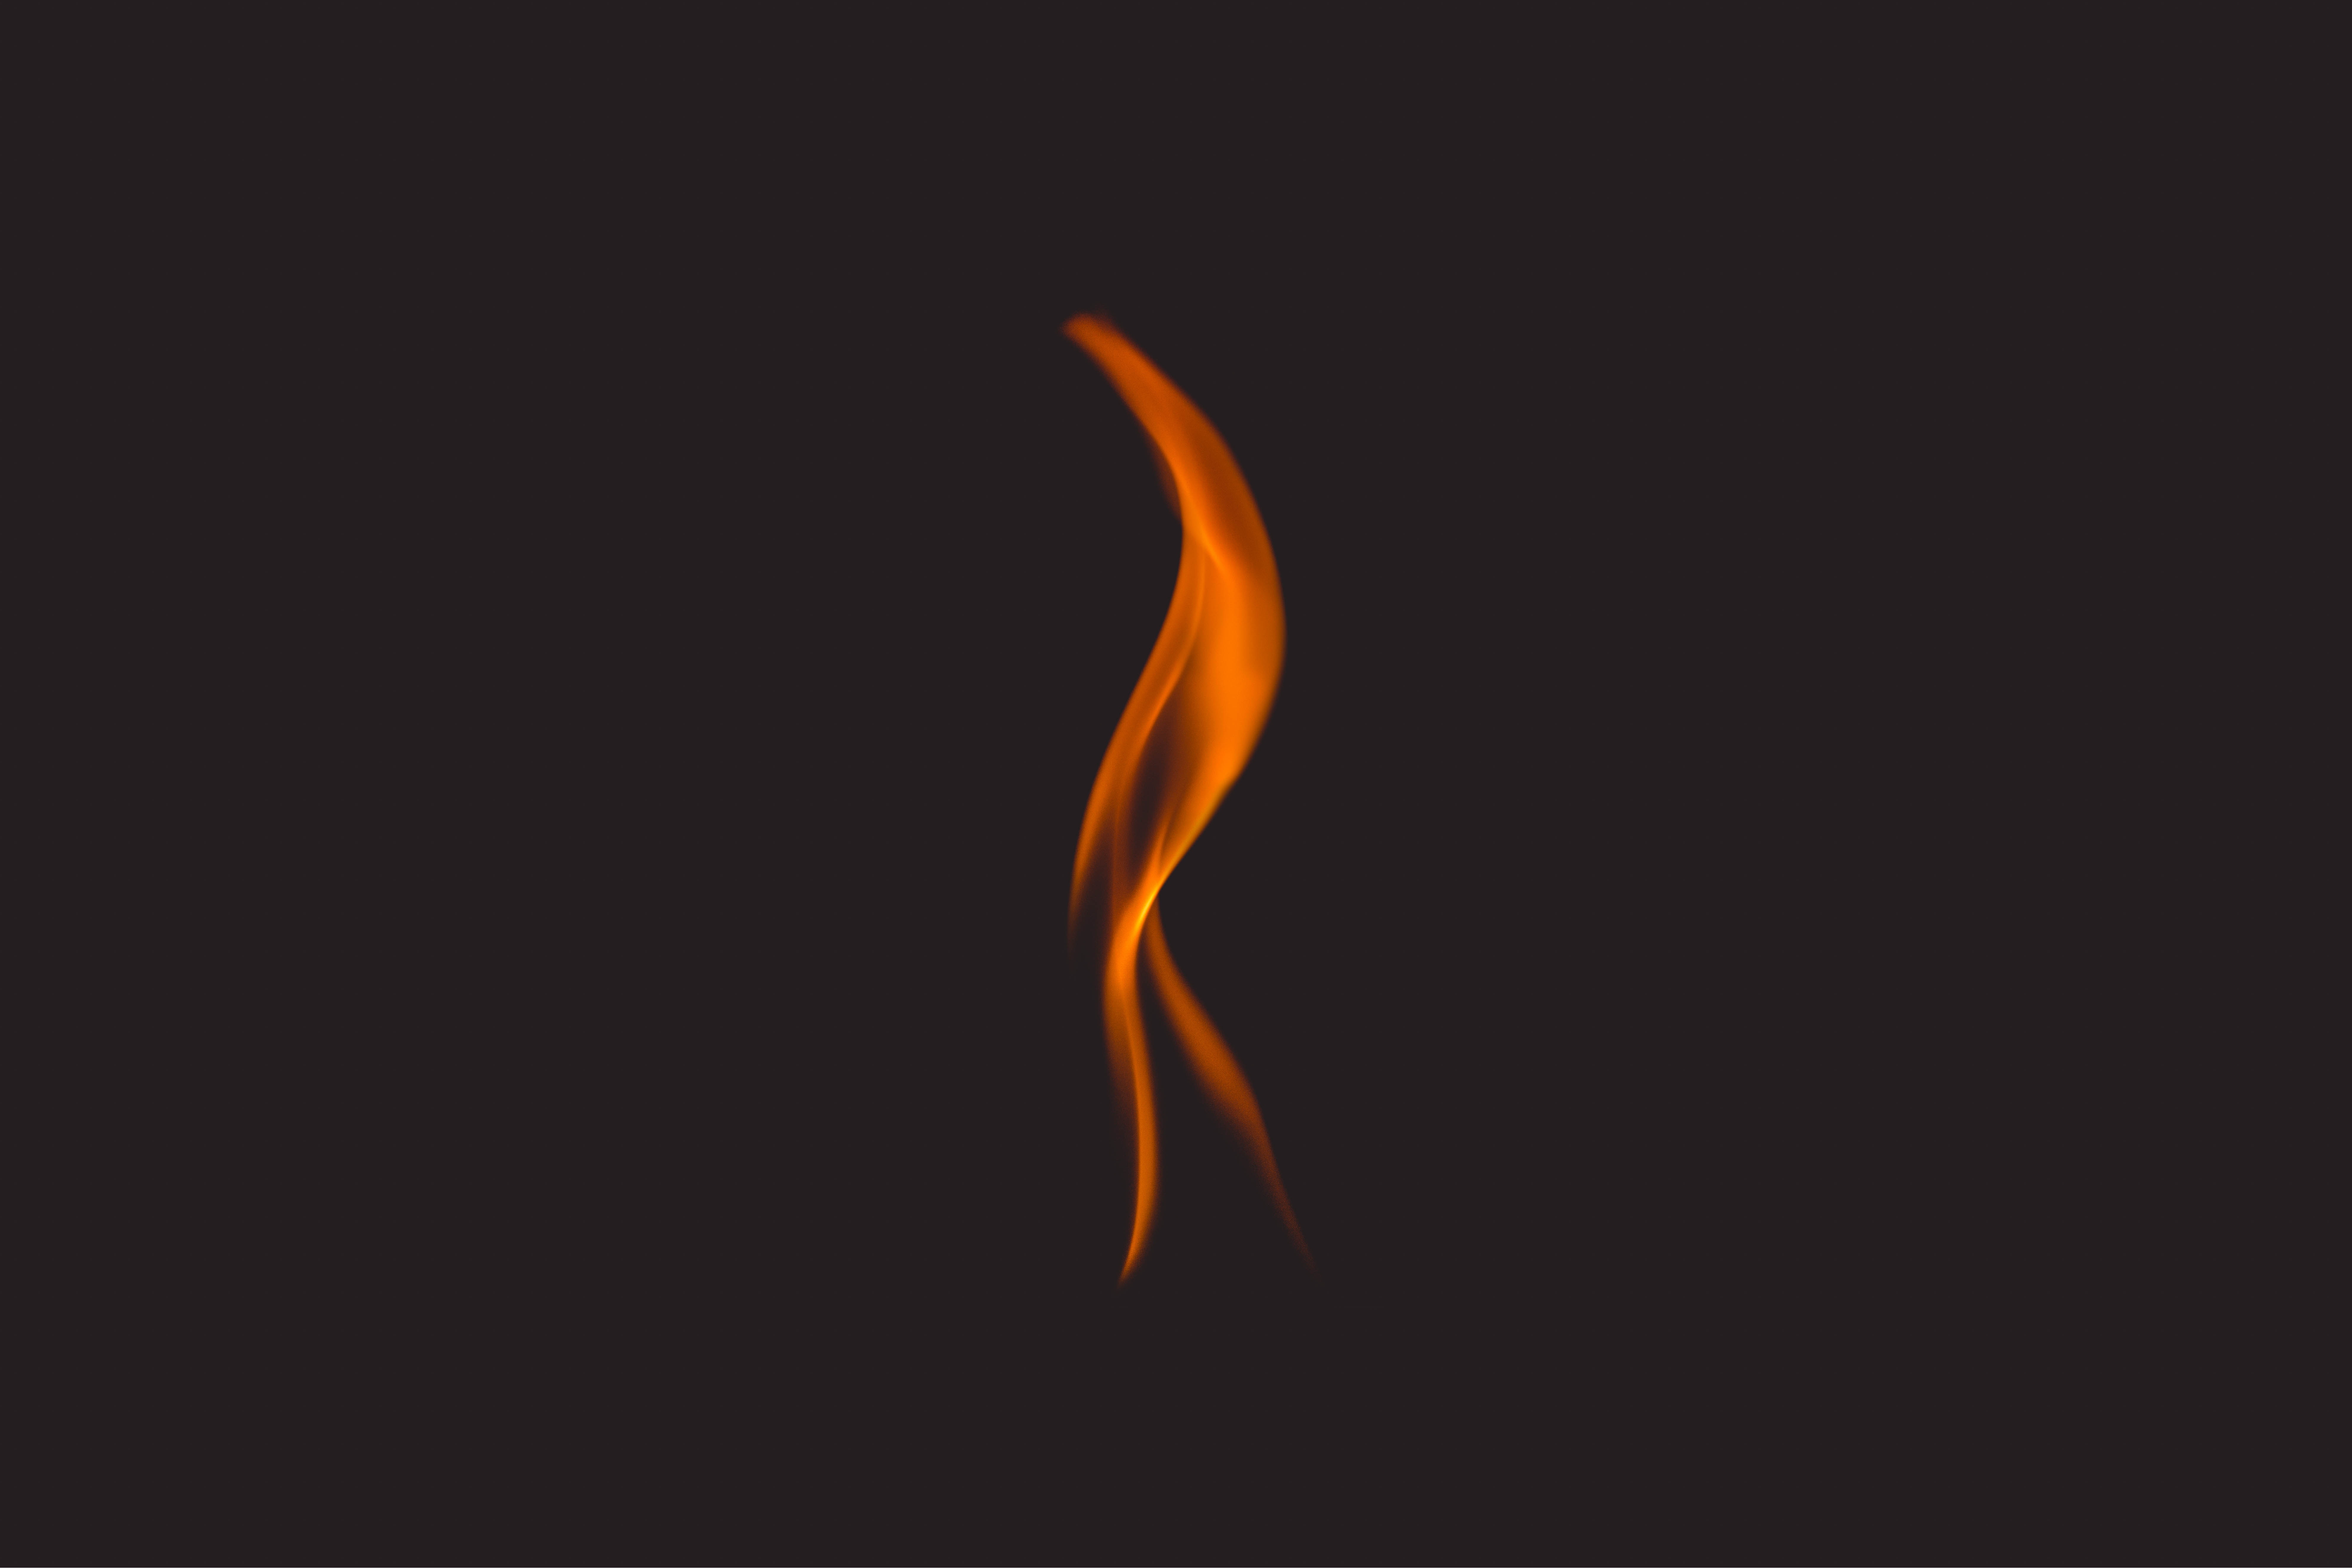 147937 download wallpaper fire, black, flame, minimalism, dark background screensavers and pictures for free